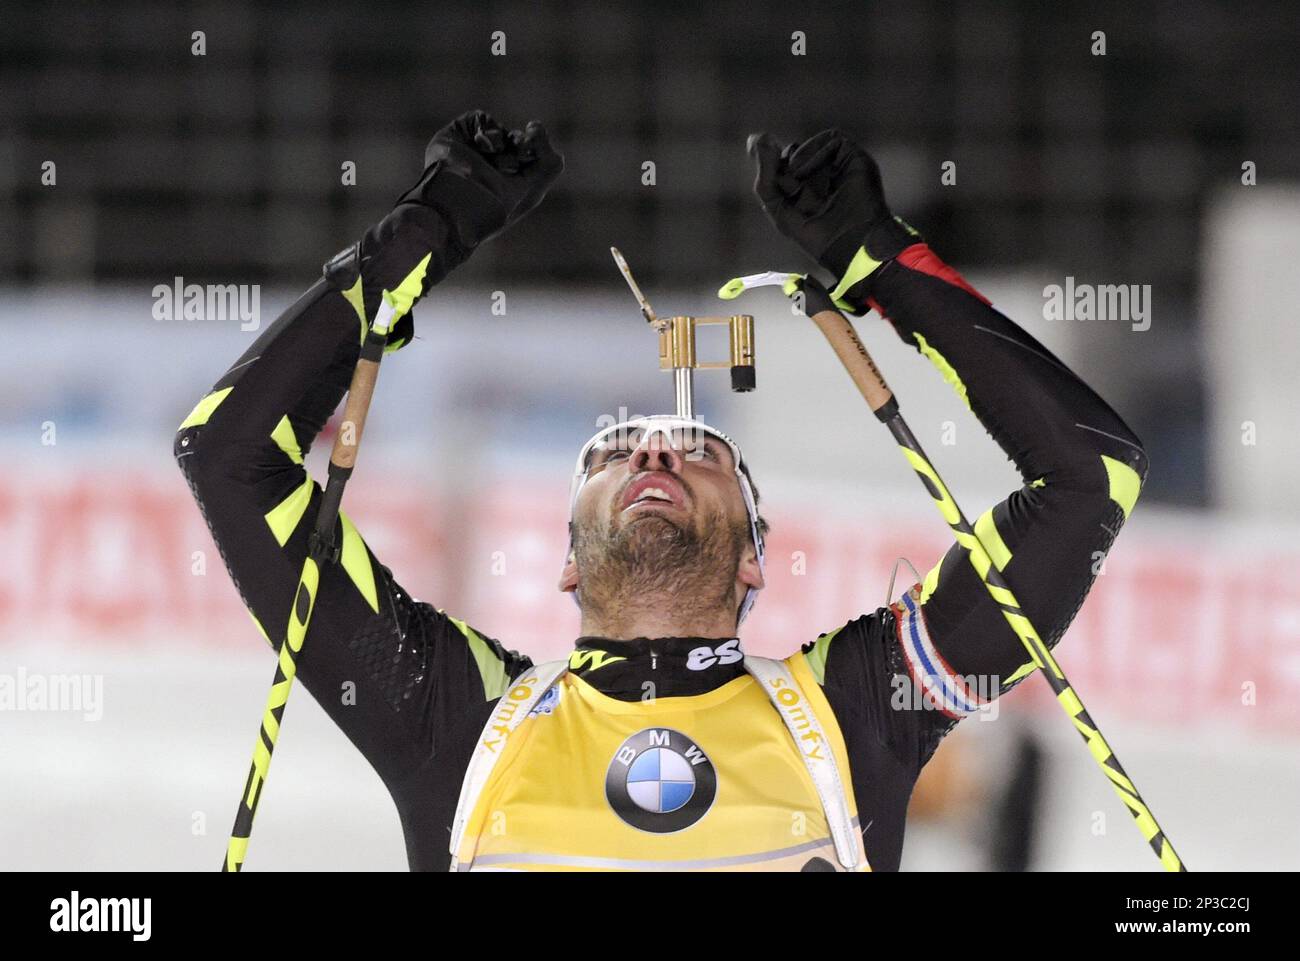 Martin Fourcade of France reacts after finishing the Mens Individual 20km competition during IBU Biathlon World Championships in Kontiolahti, Finland on Thursday March 12, 2015